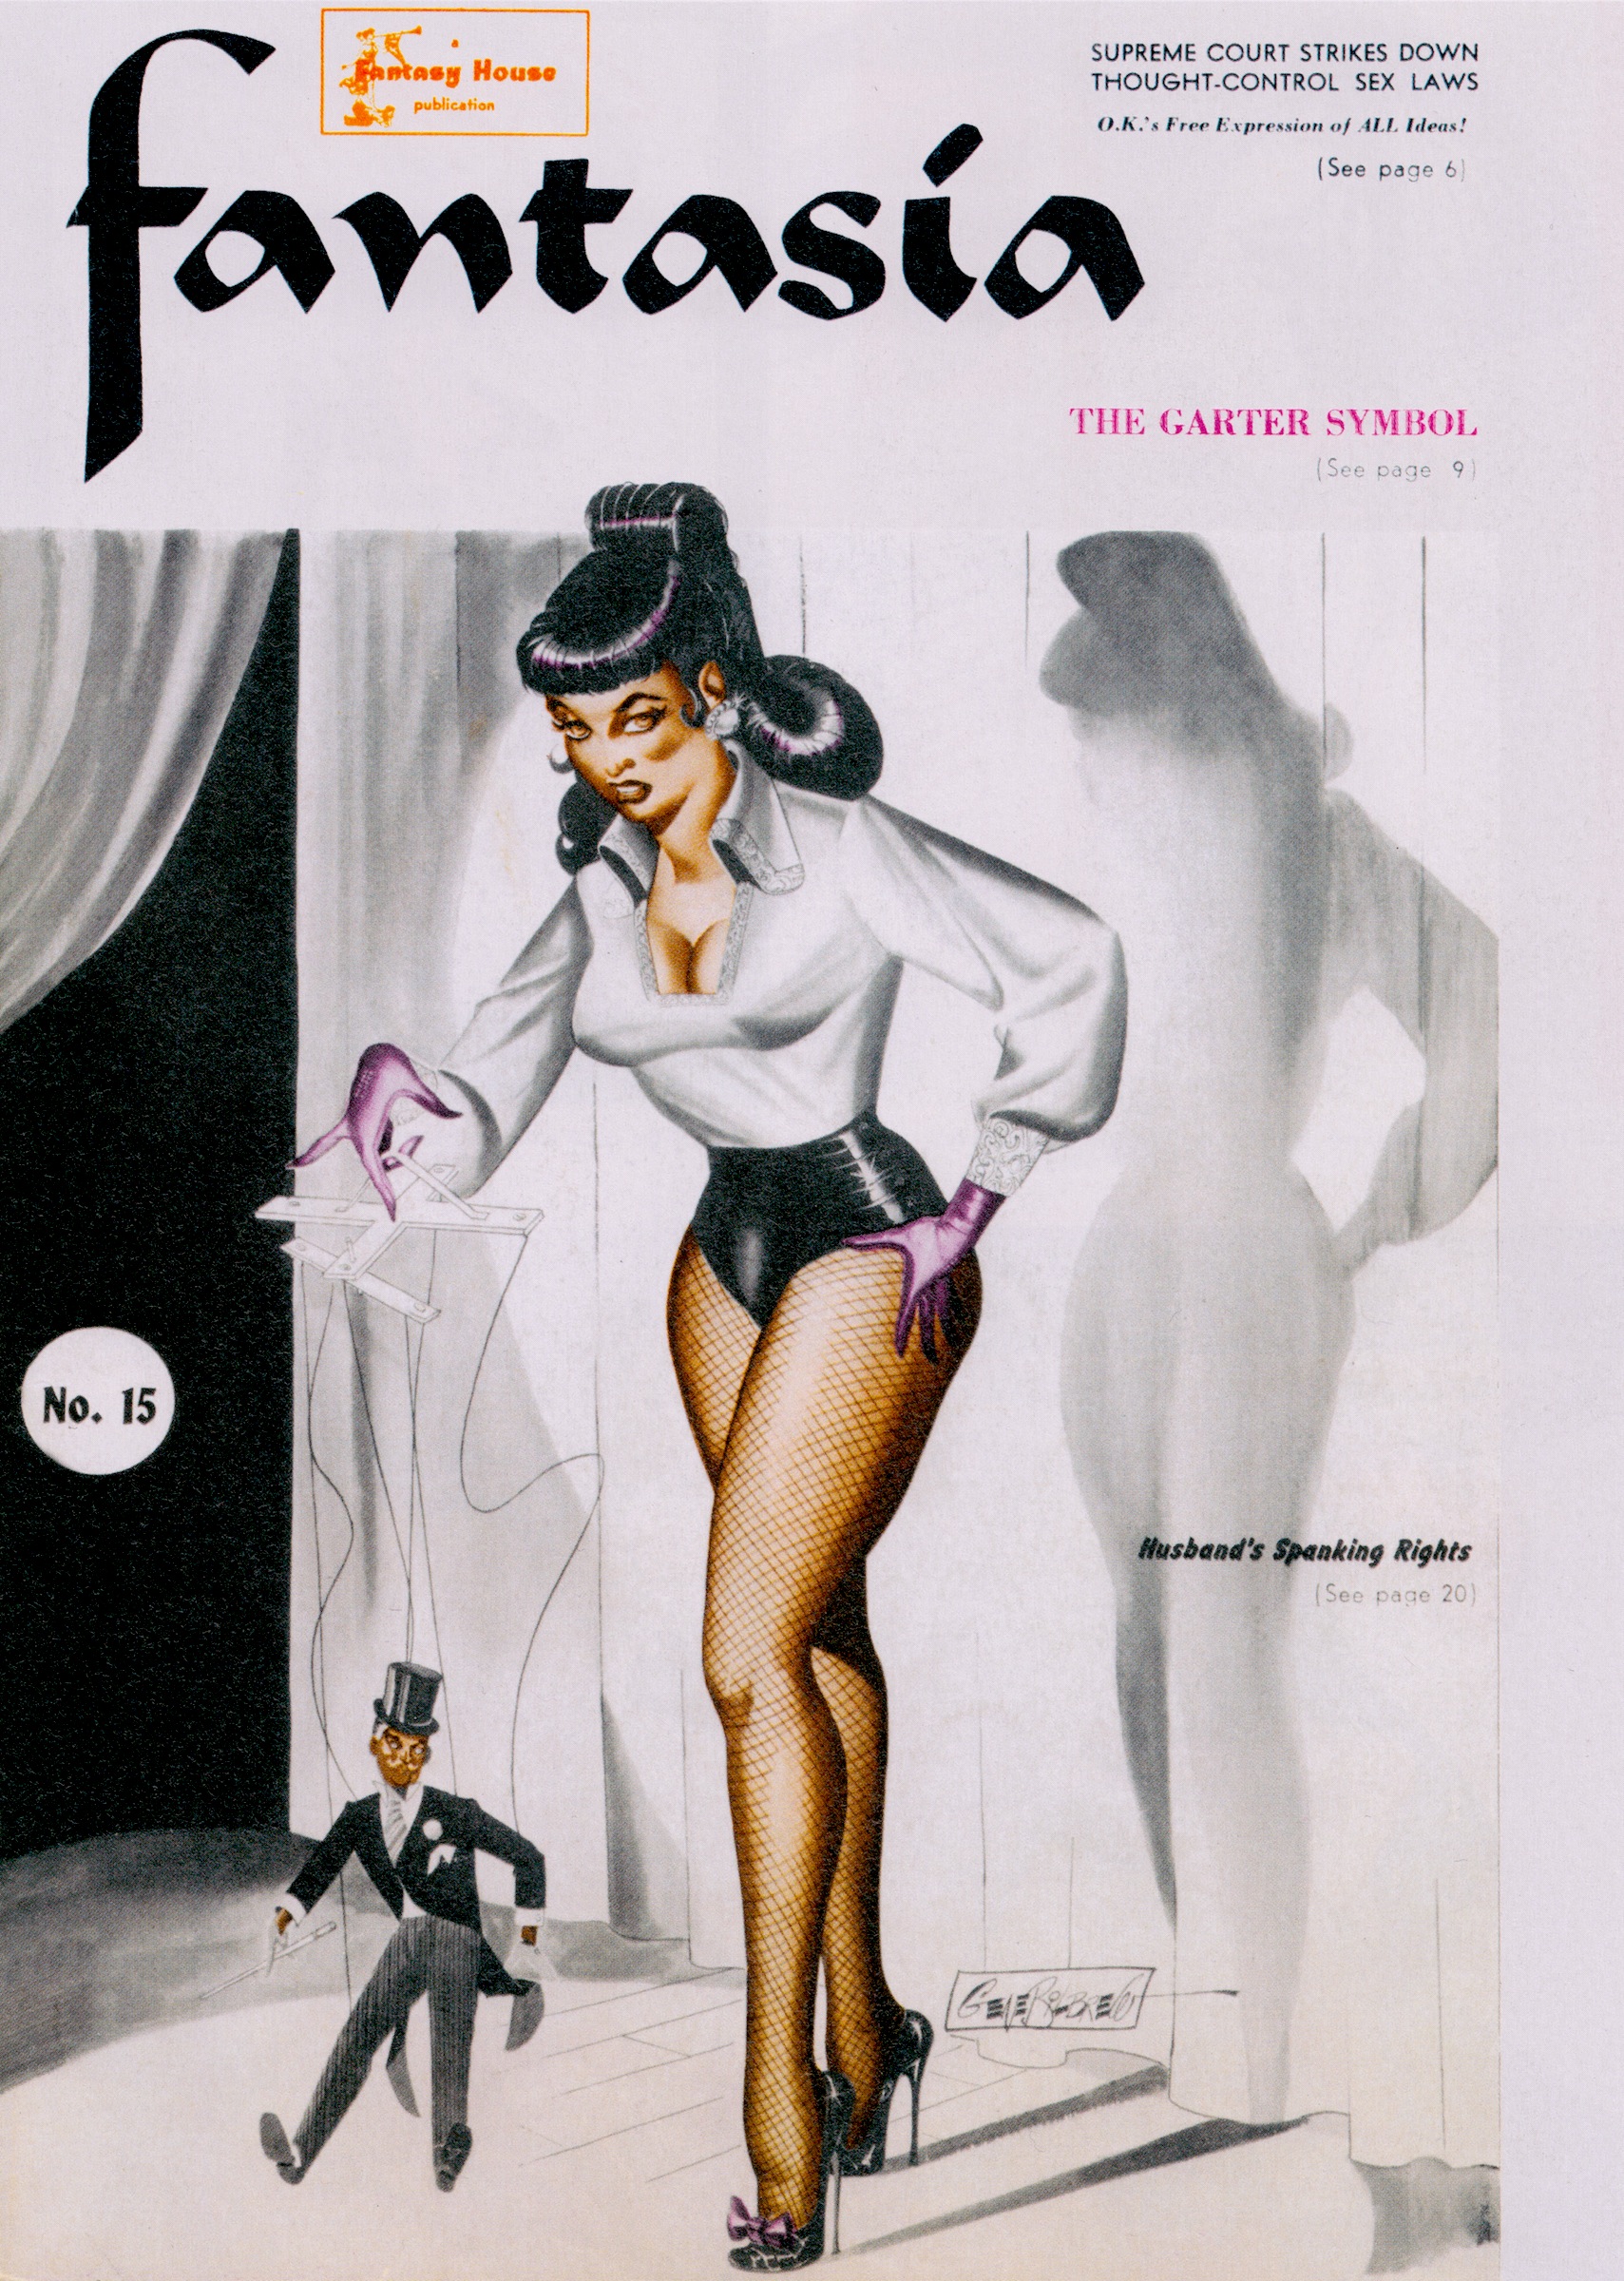 Fantasia magazine: woman in fishnet stockings and high heels with puppet of a man